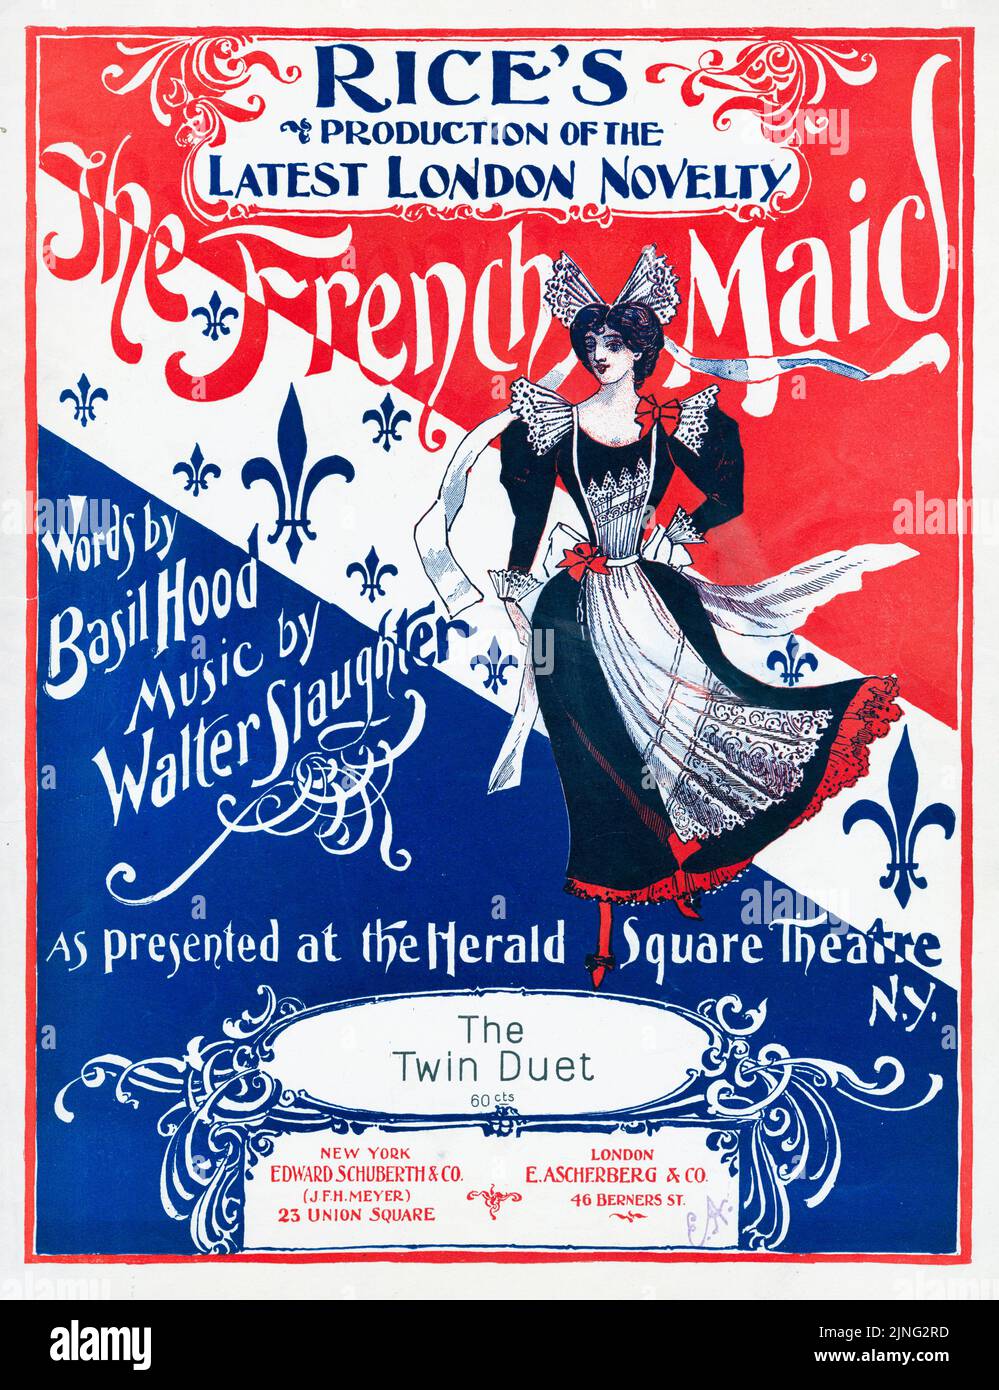 French maid (1897) Edward E. Rice's Production of the Latest London Novelty, Words by Basil Hood, Music by Walter Slaughter, As presented at the Herald Square Theatre, The Twin Duet, Published by Edward Schuberth and Company. Sheet music cover Stock Photo